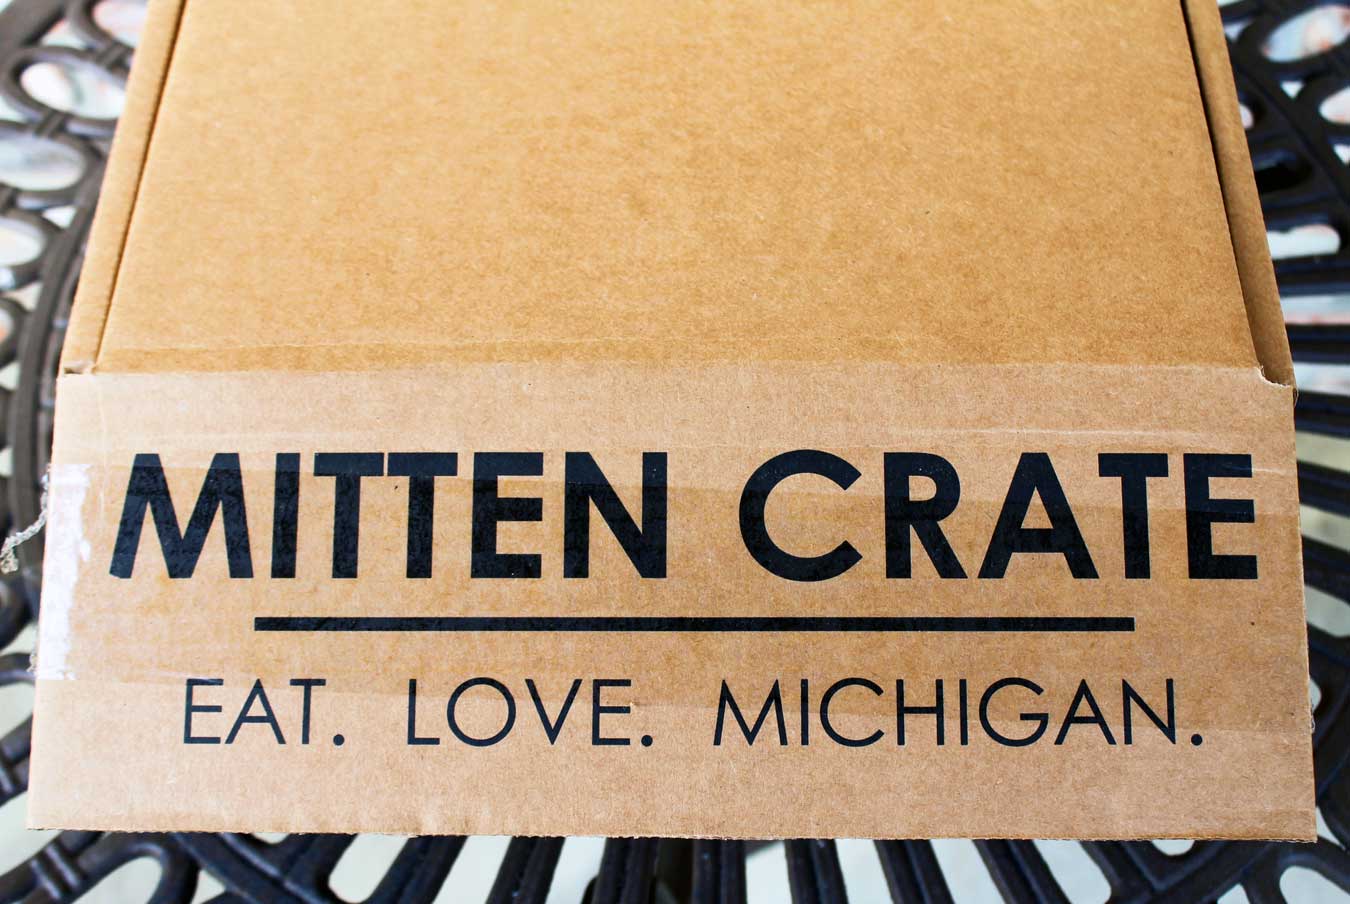 Michigan-Made Gift Idea: Mitten Crate Subscription Box - [via Wading in Big Shoes]